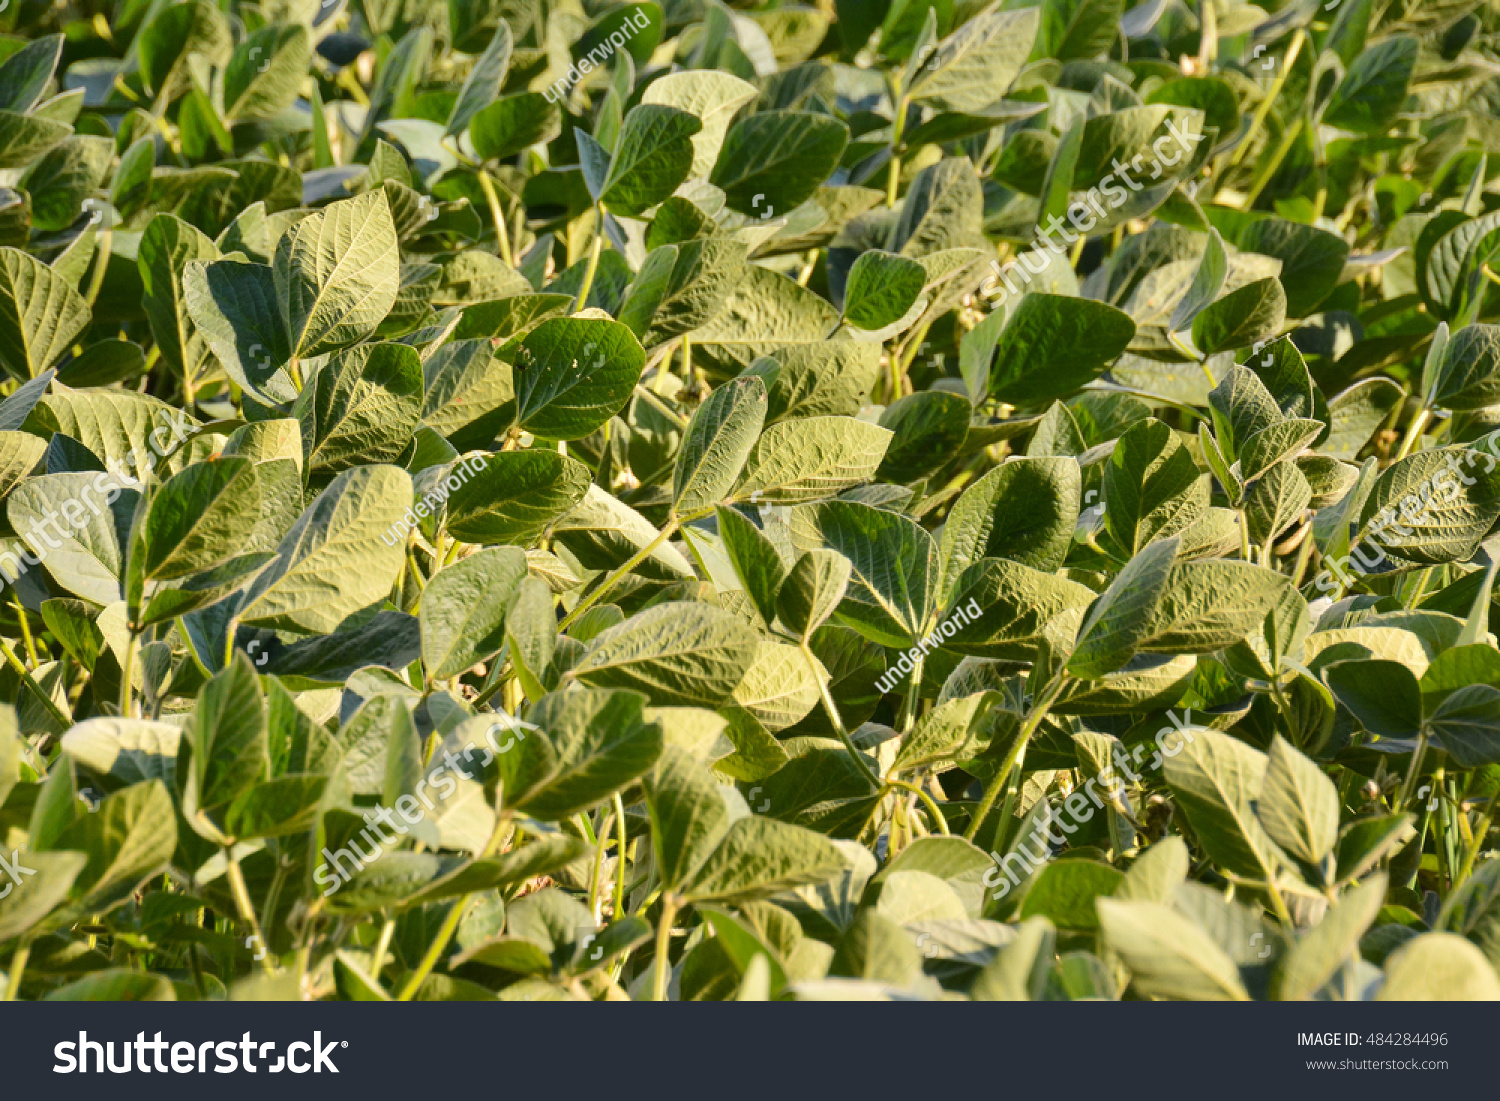 Photo Picture of a Soy Bean Plant Field  #484284496